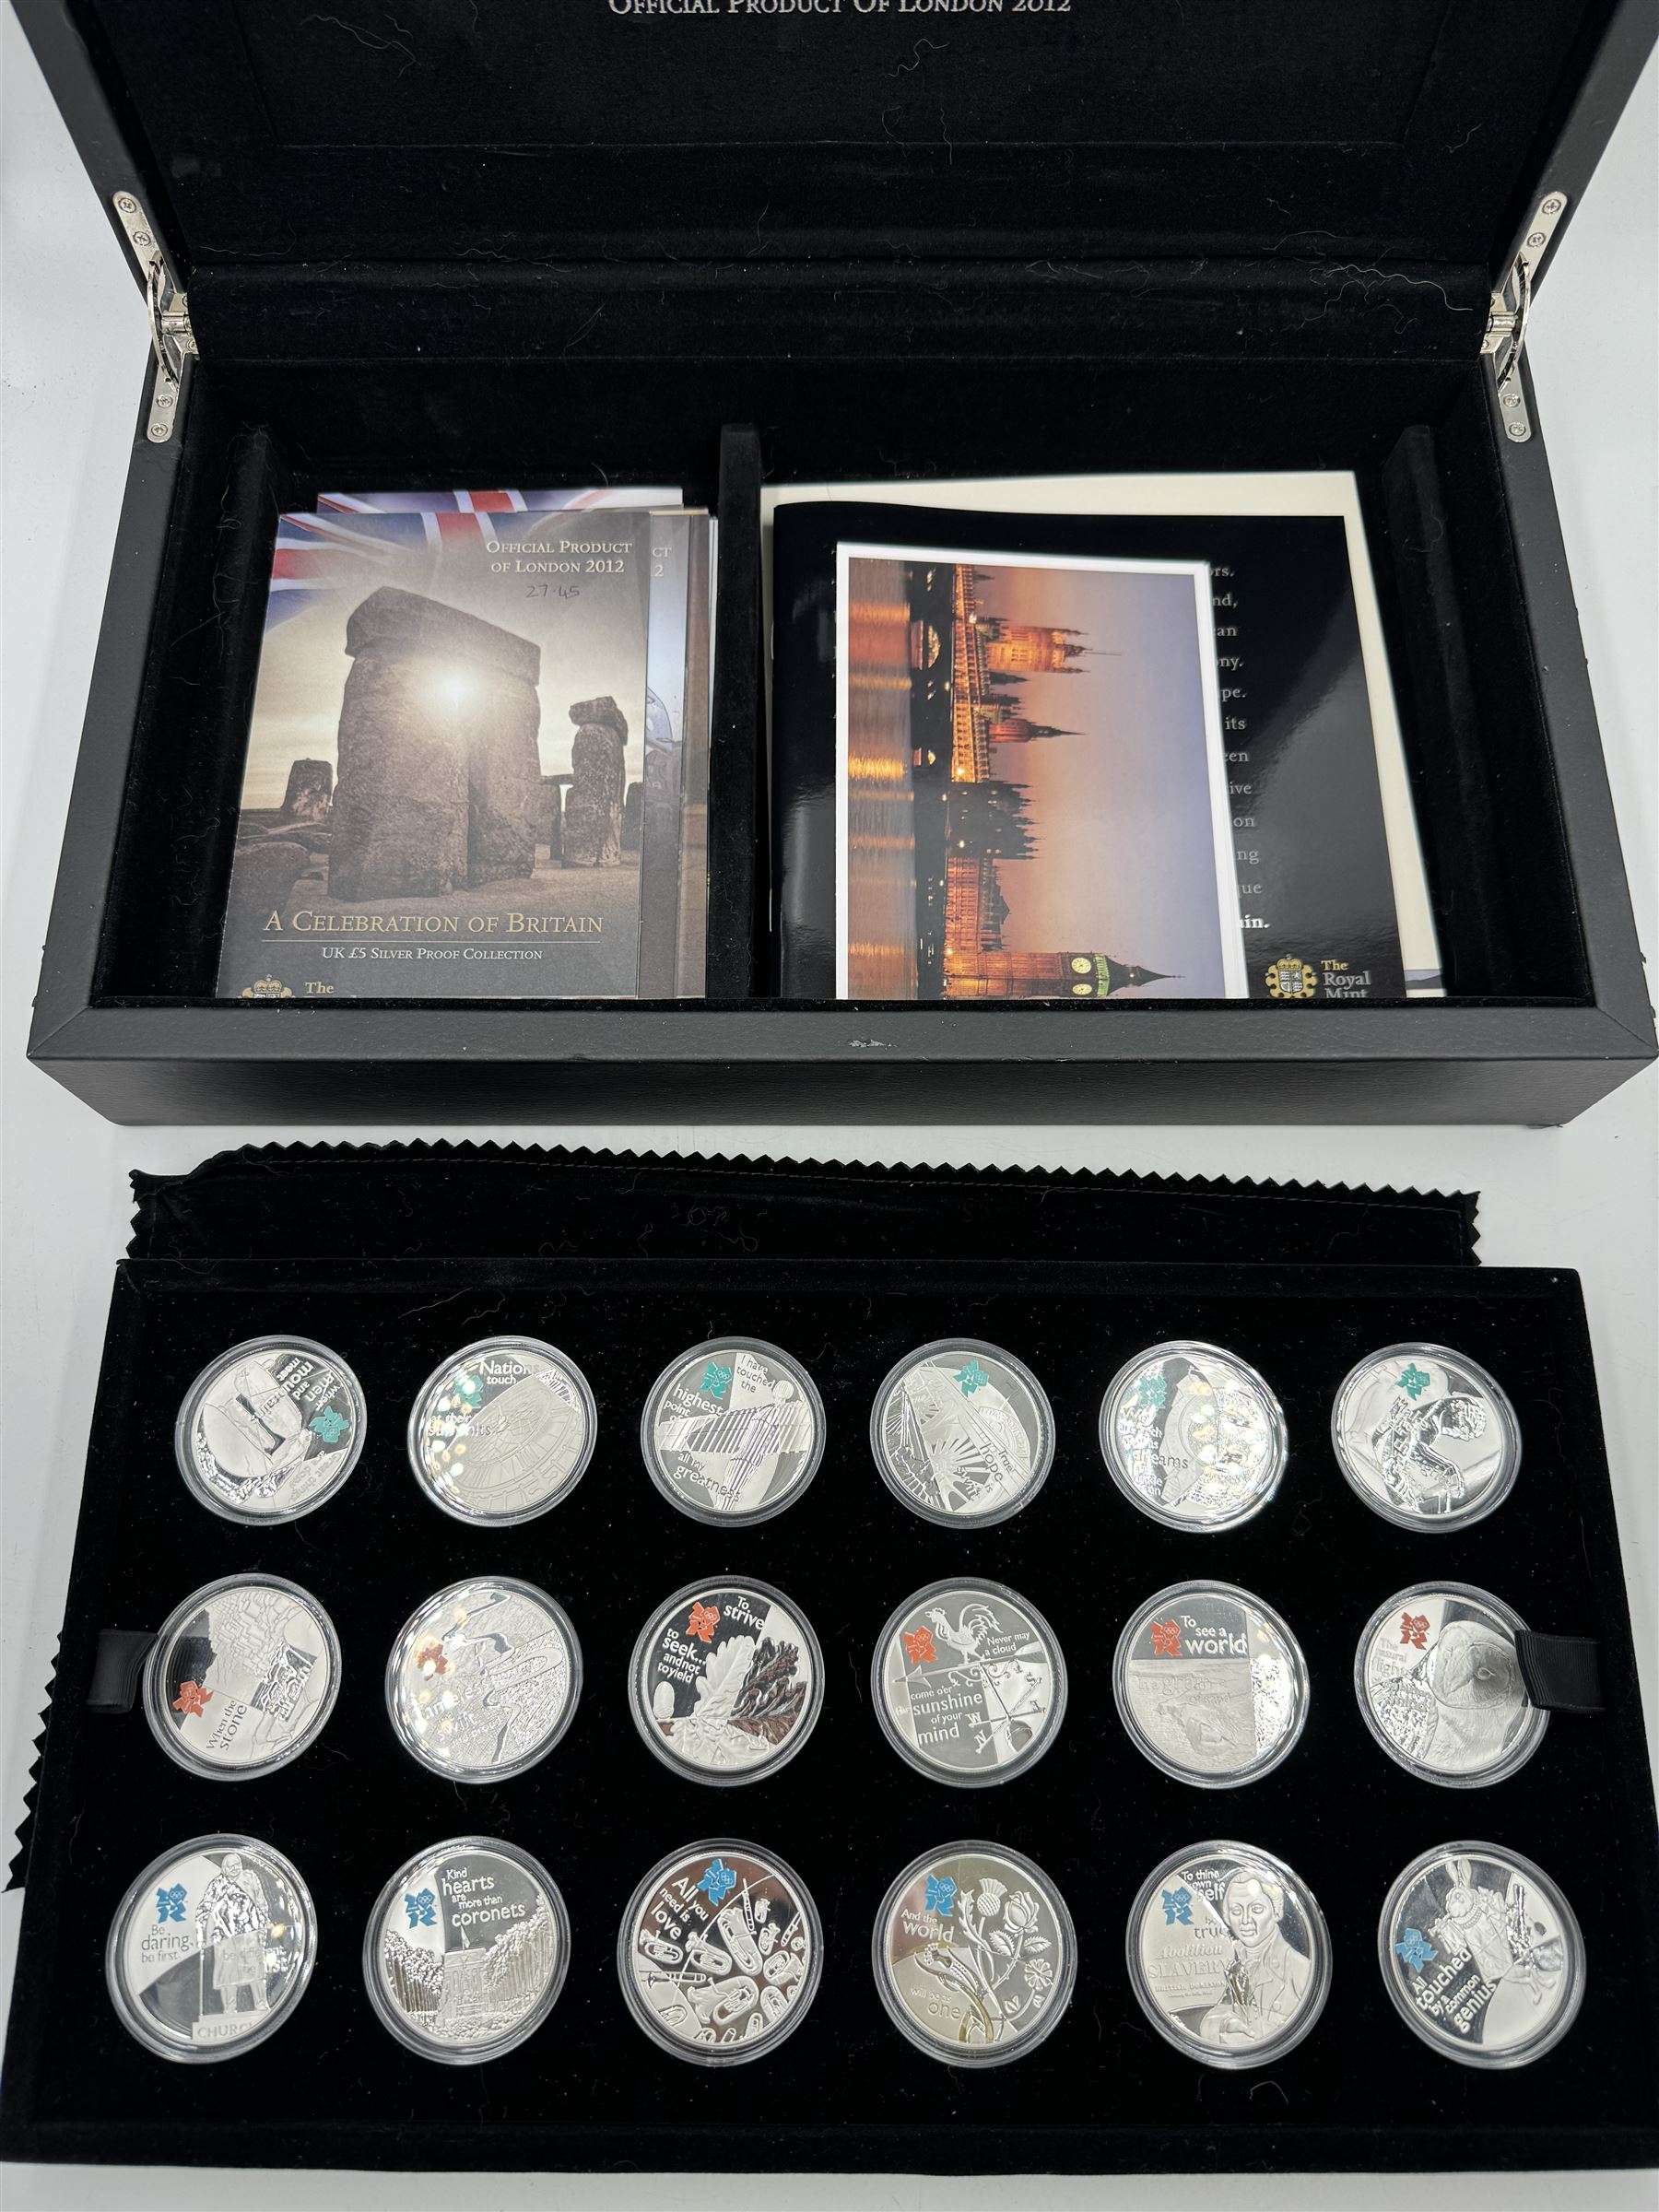 The Royal Mint United Kingdom 'A Celebration of Britain' silver proof coin set - Image 4 of 4